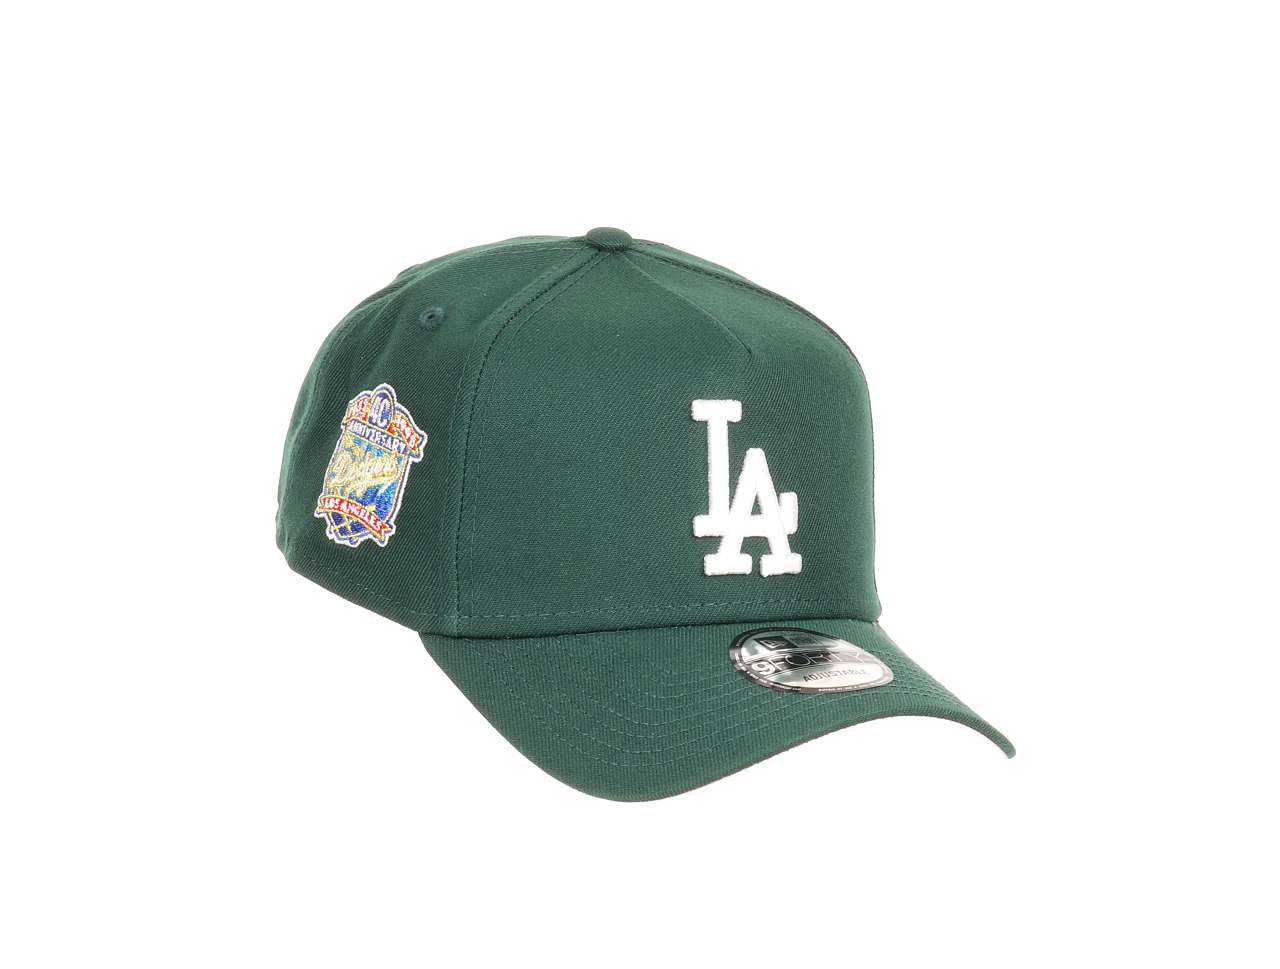 Los Angeles Dodgers MLB 40th Anniversary Sidepatch Dark Green 9Forty A-Frame Adjustable Cap New Era